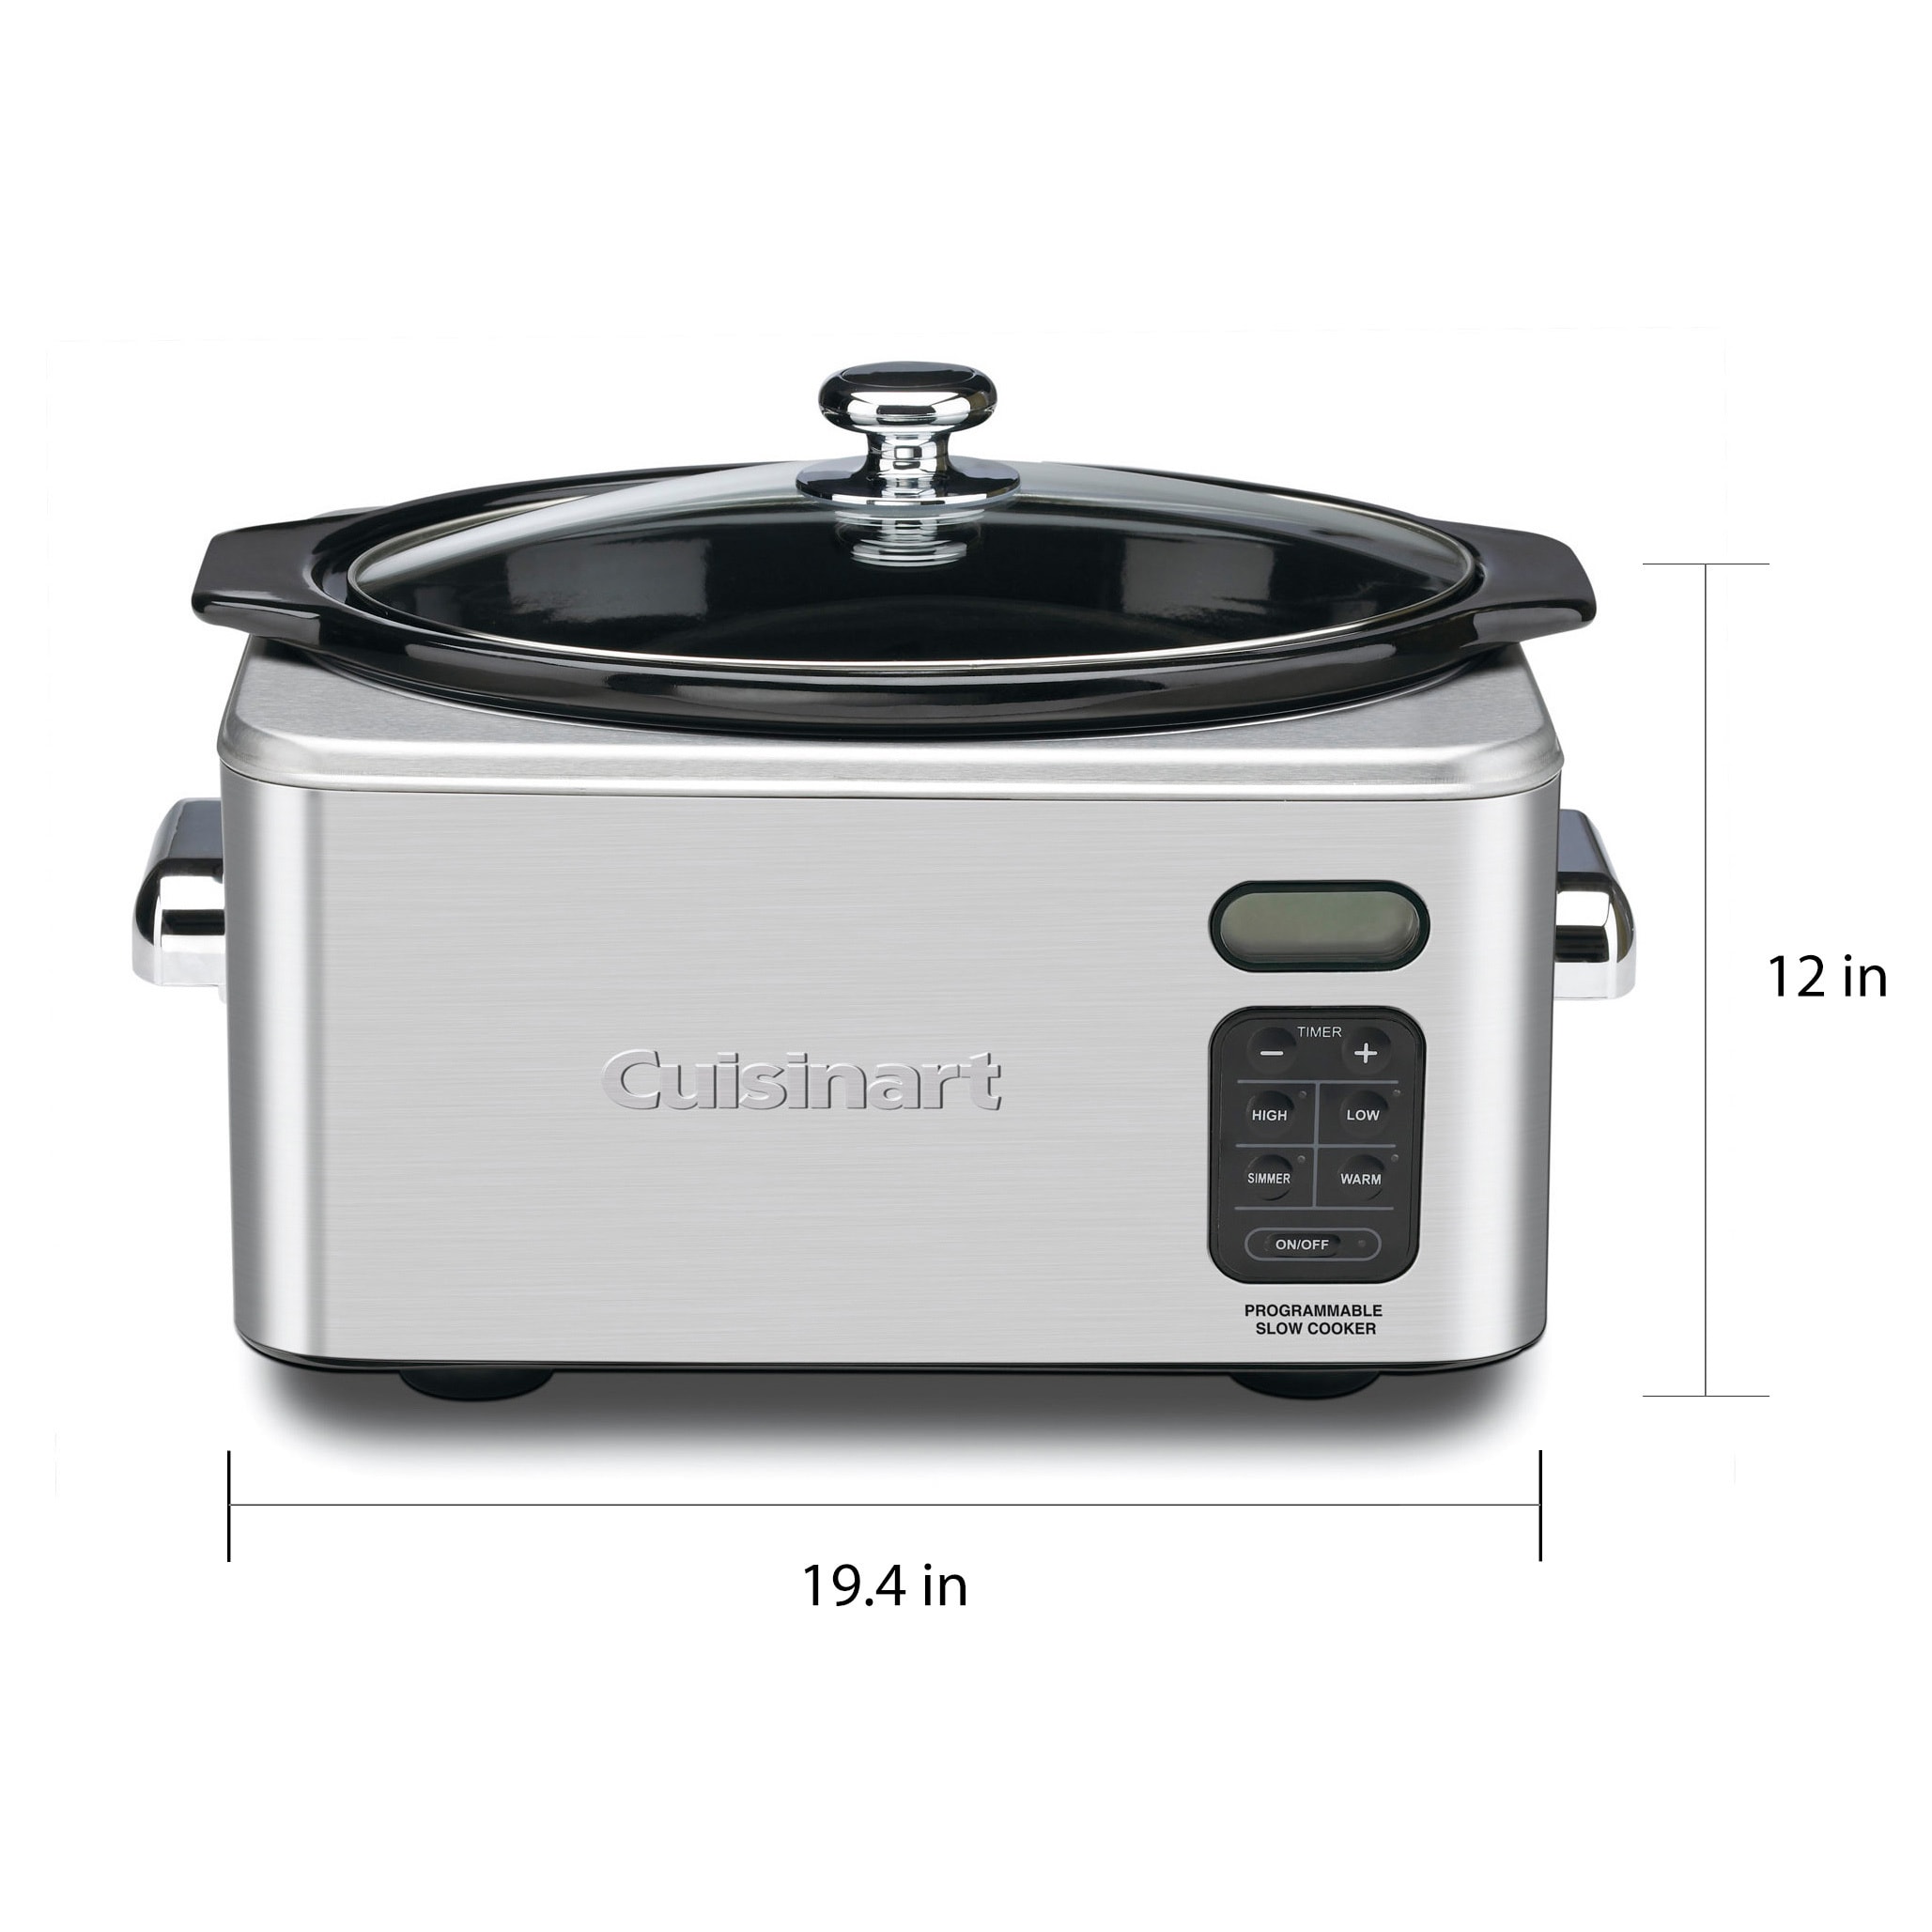 https://ak1.ostkcdn.com/images/products/4216783/Cuisinart-PSC-650-Stainless-Steel-6.5-quart-Programmable-Slow-Cooker-01301bf0-82ef-4301-b206-108d24a3bb40.jpg